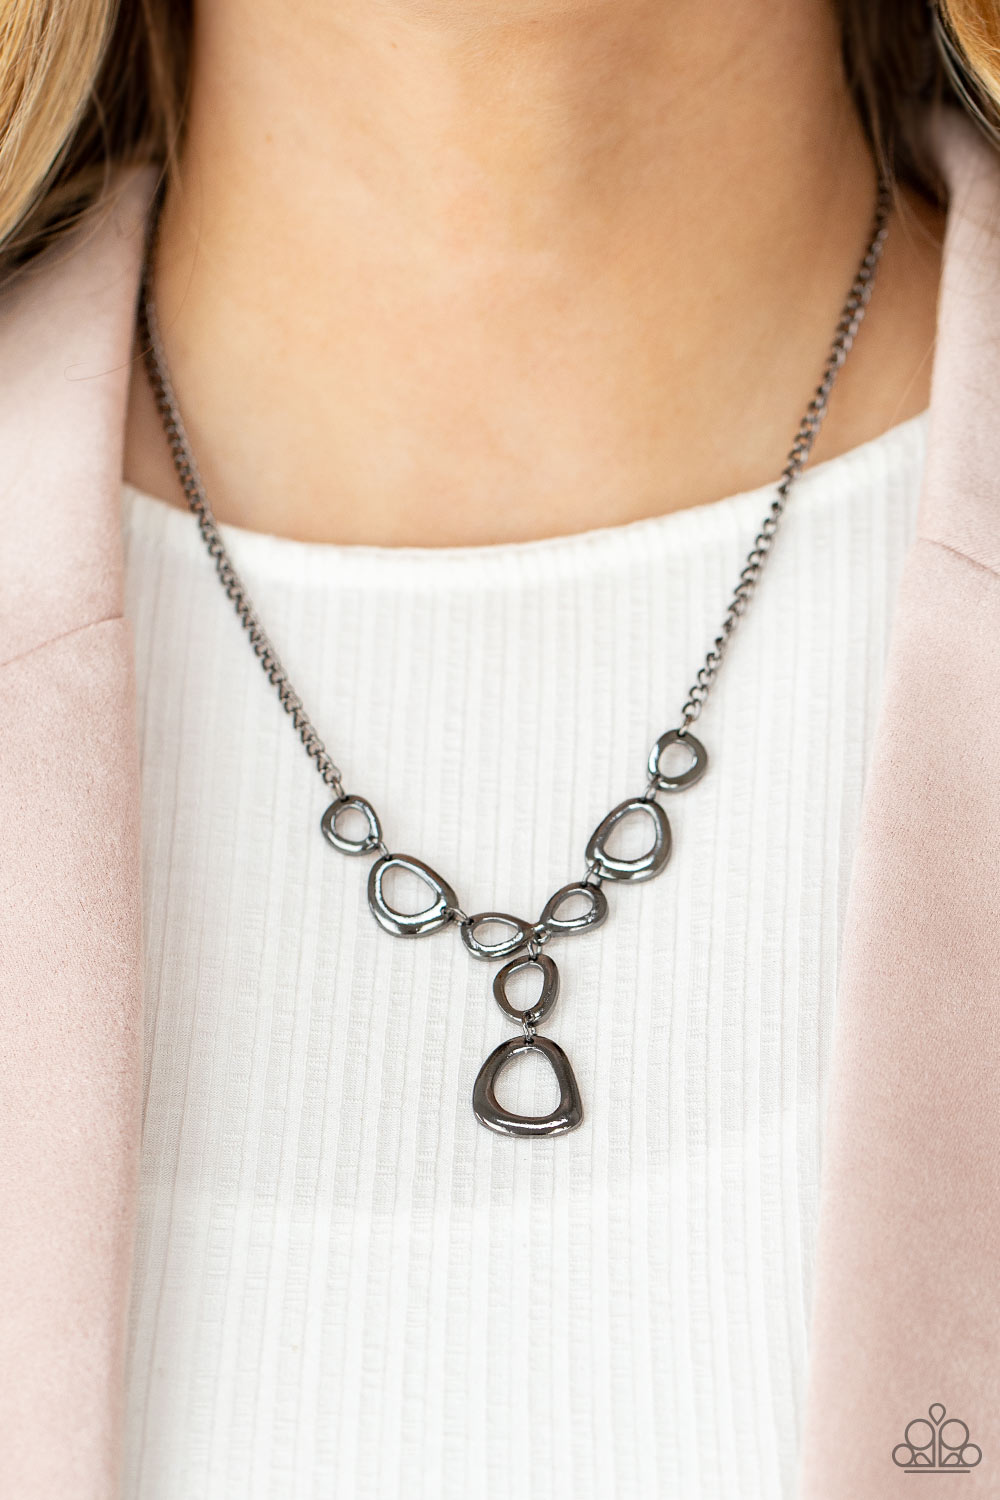 Paparazzi Accessories: BuStrands of Sass - Black Choker Necklace